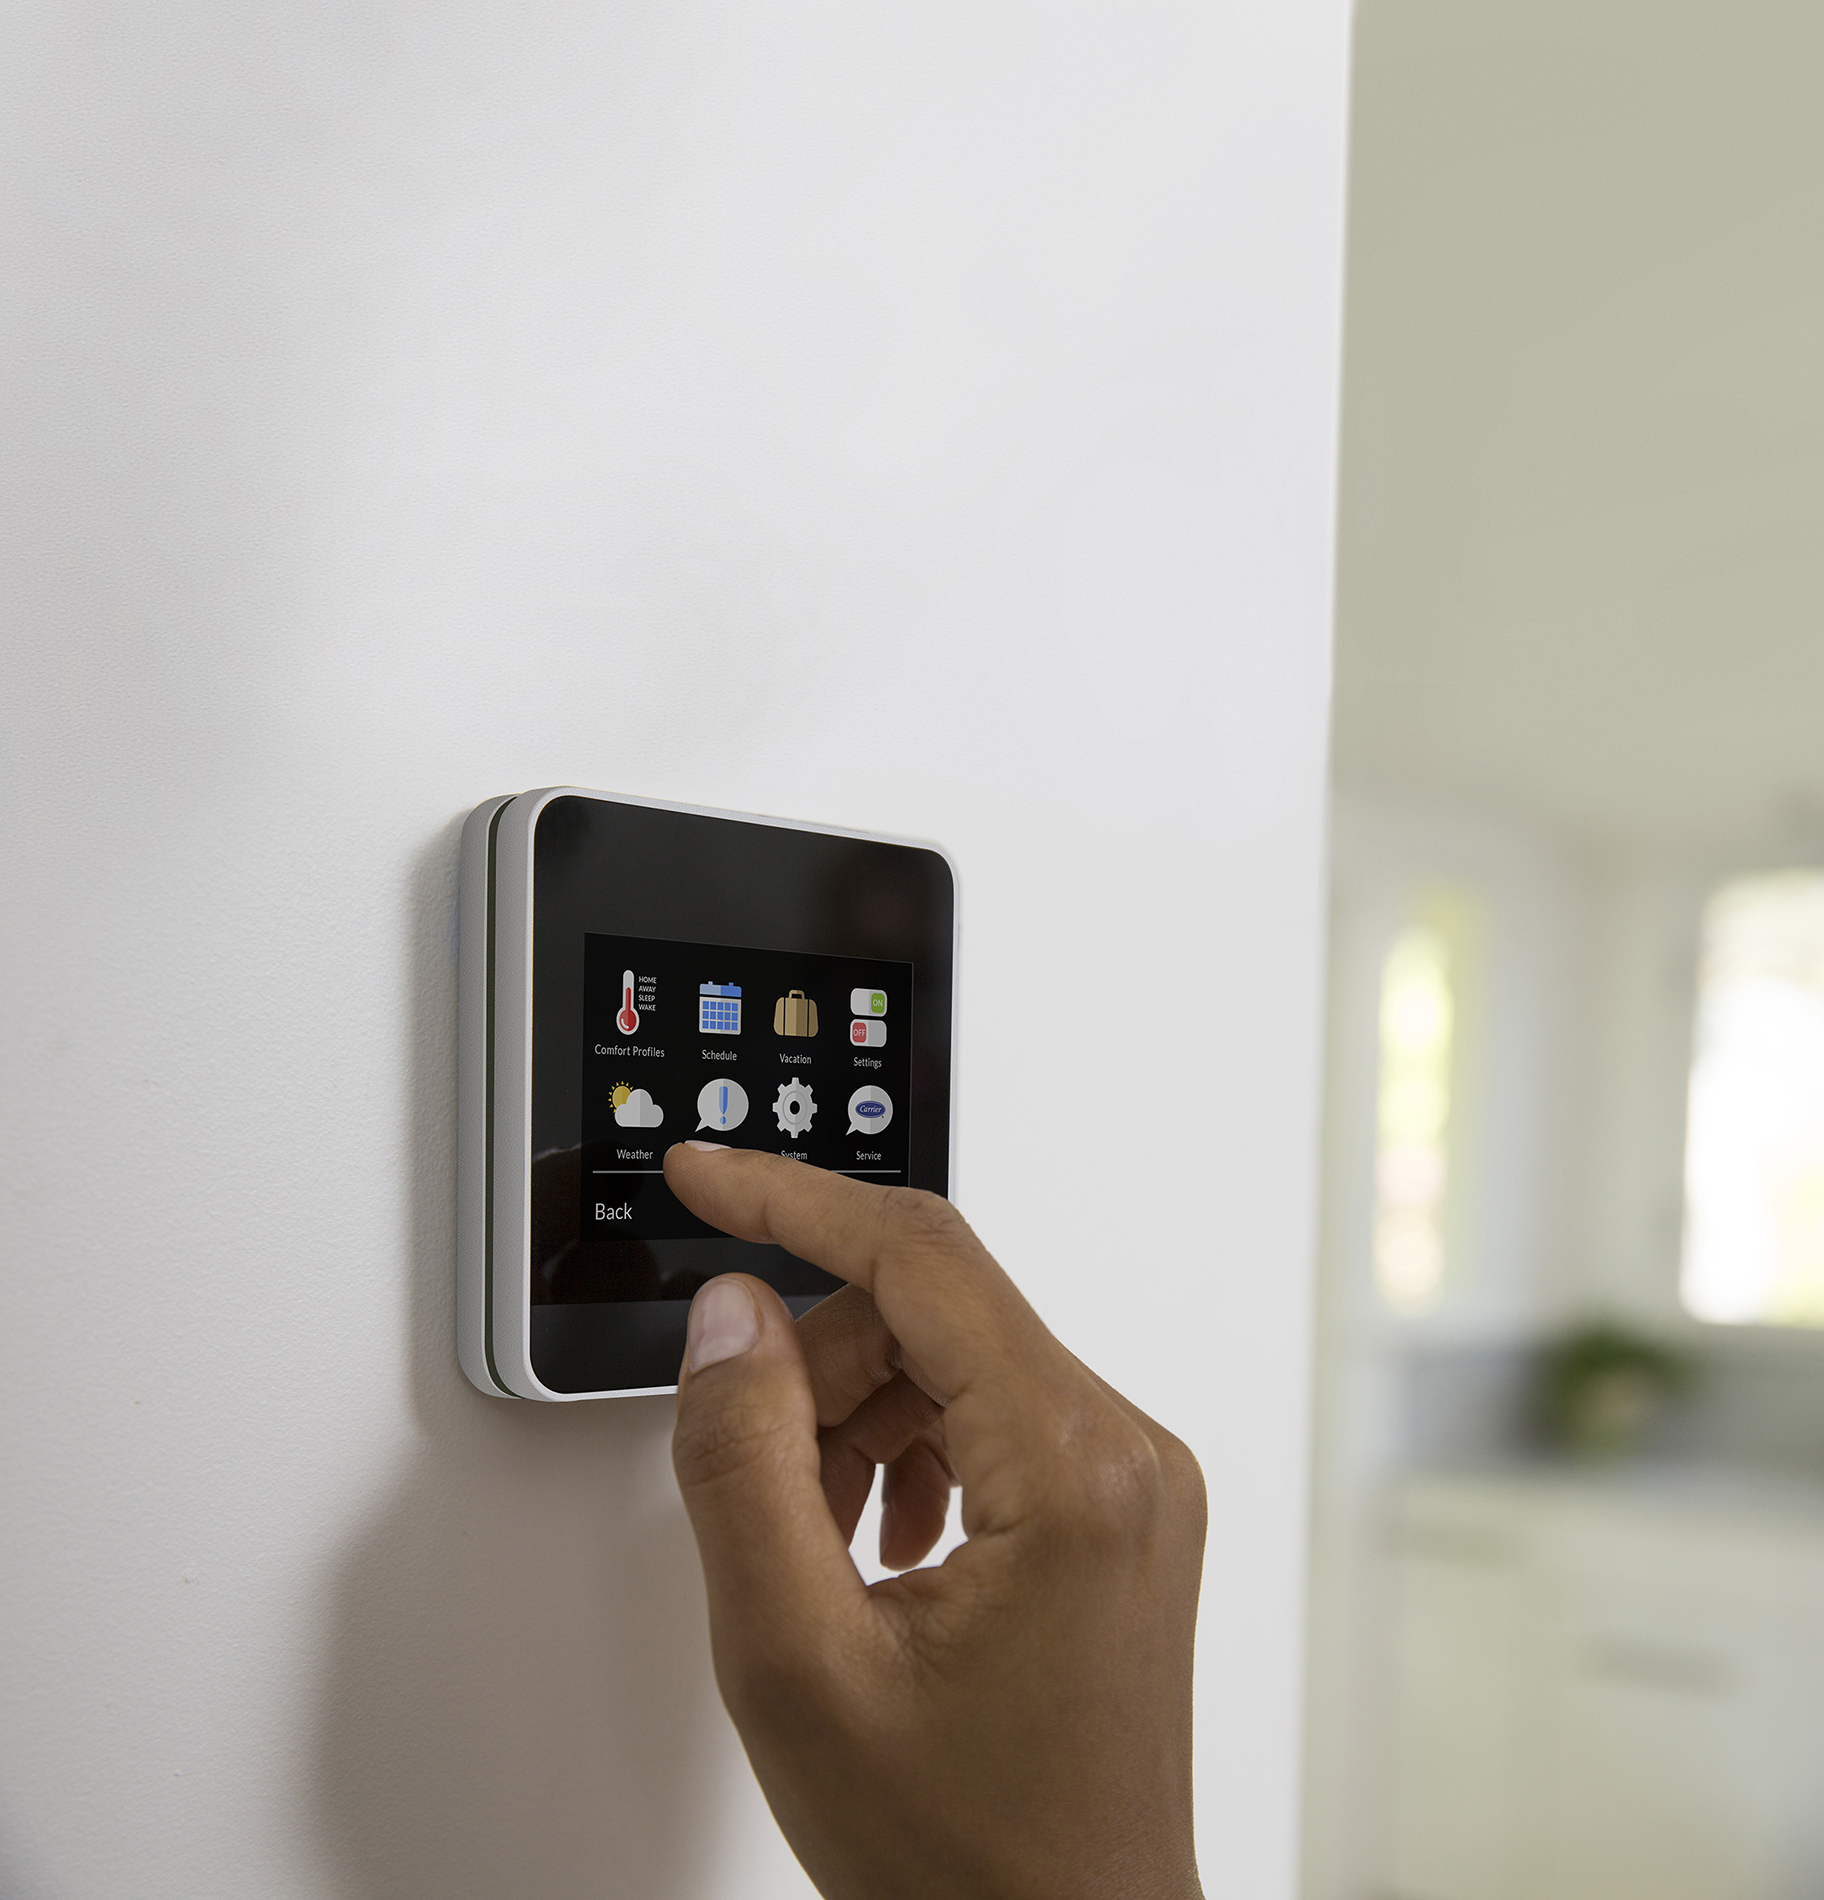 https://webrown.com/wp-content/uploads/2018/11/Carrier-COR-Thermostat-on-Wall.jpg